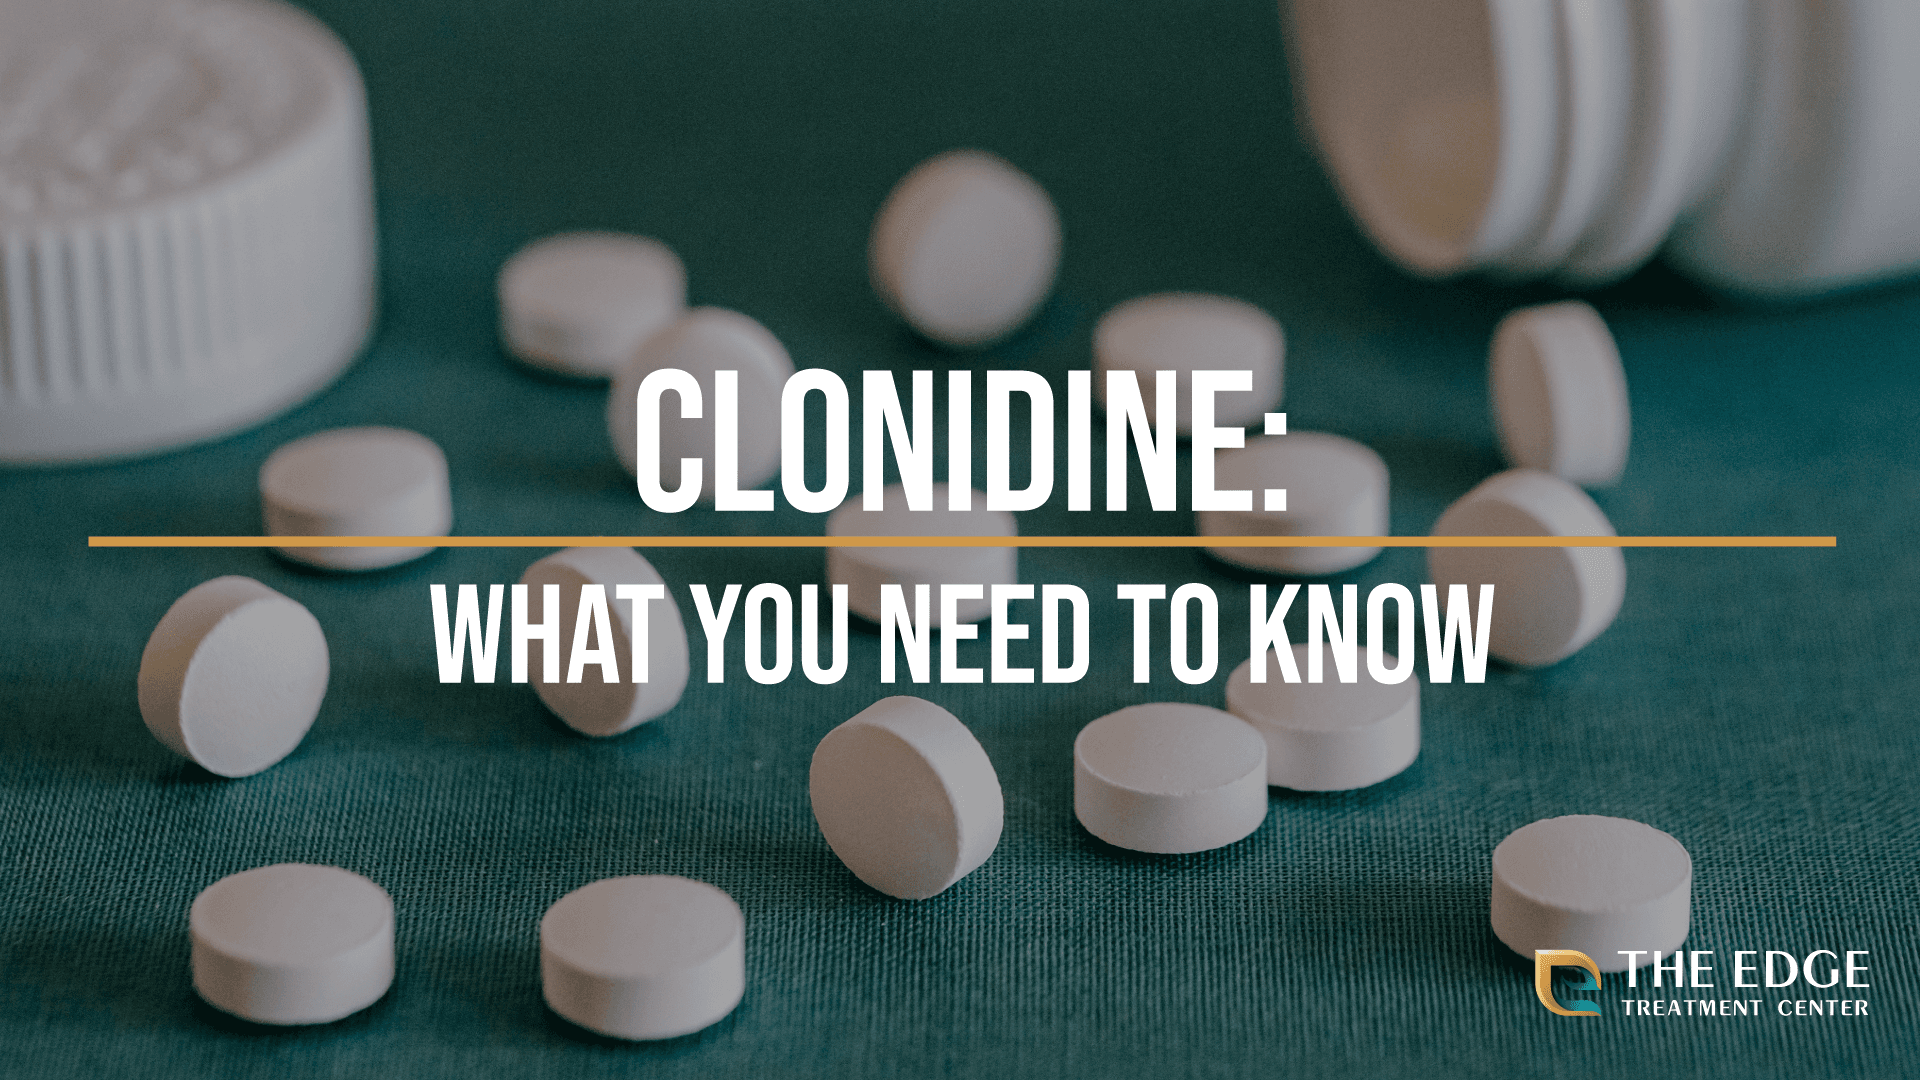 What is Clonidine Withdrawal Like?